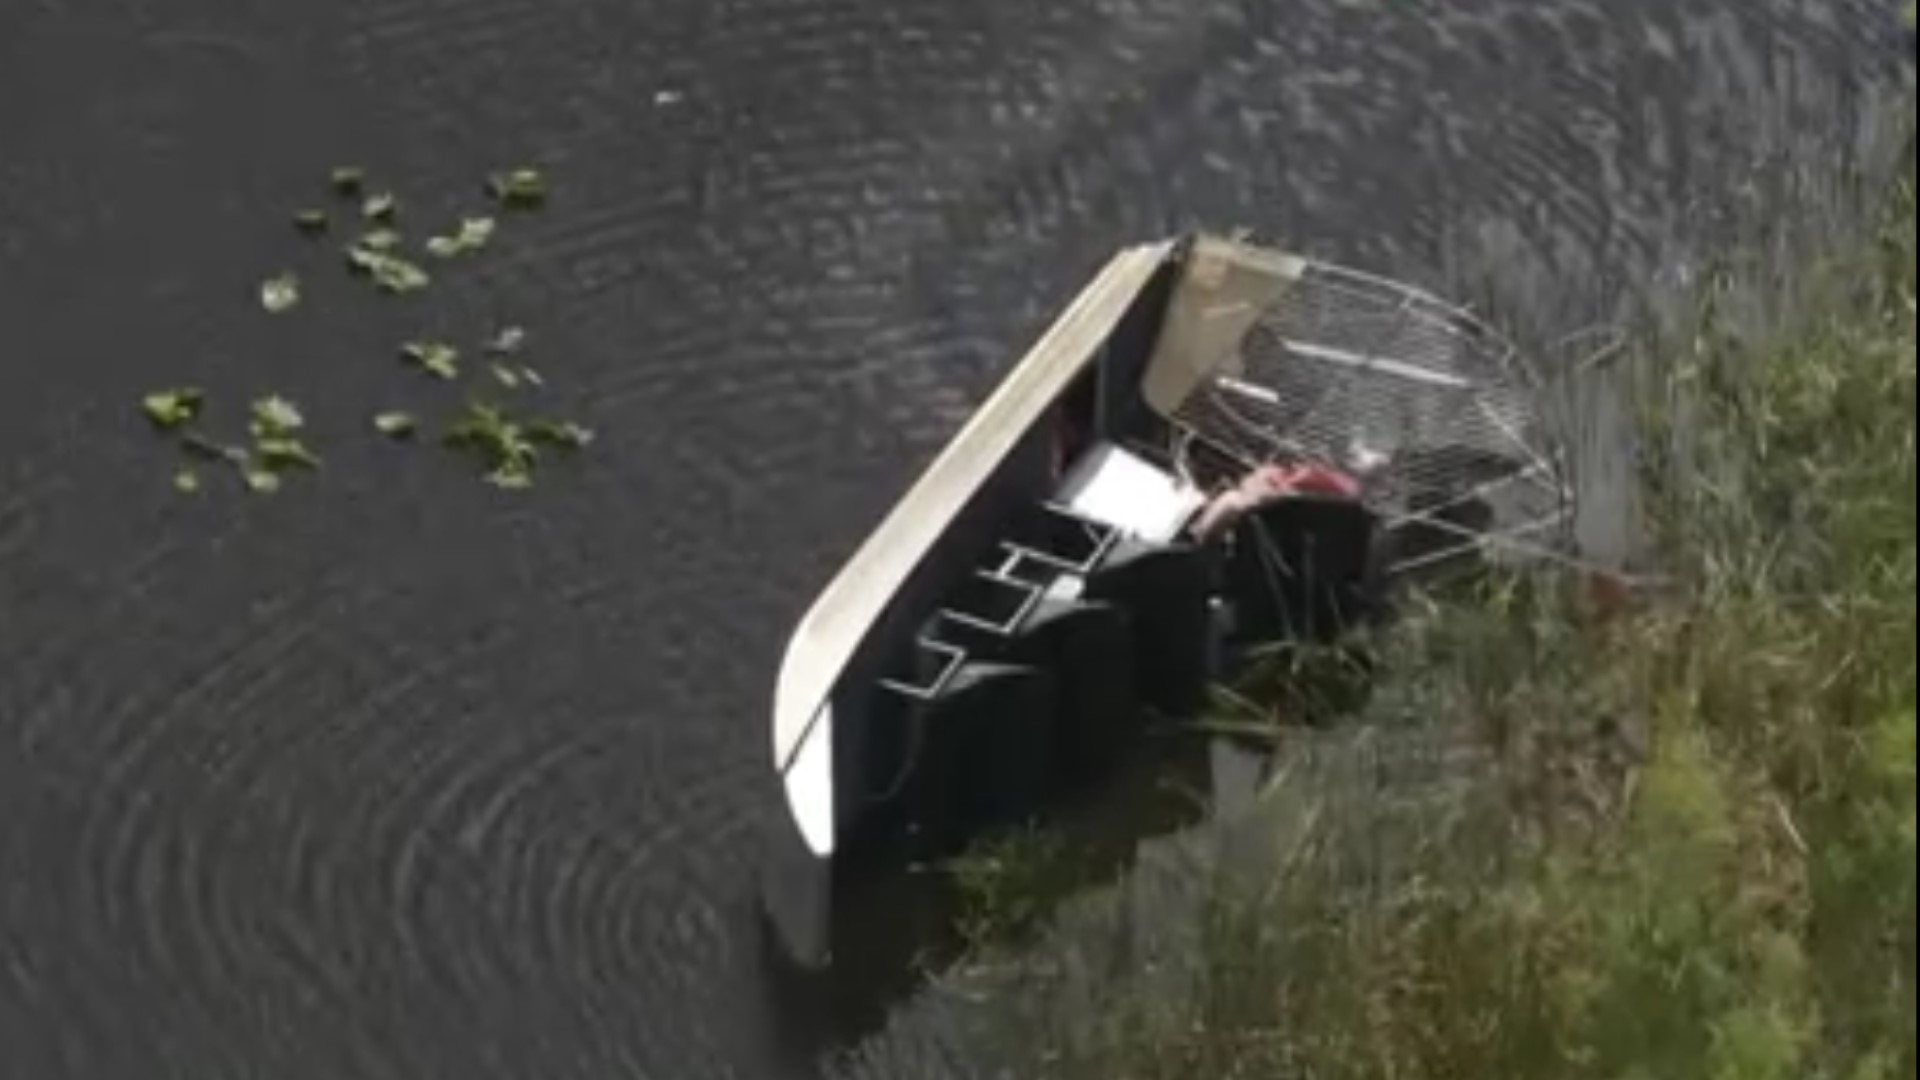 Several people were rescued from the water after their airboat flipped in the Florida Everglades.